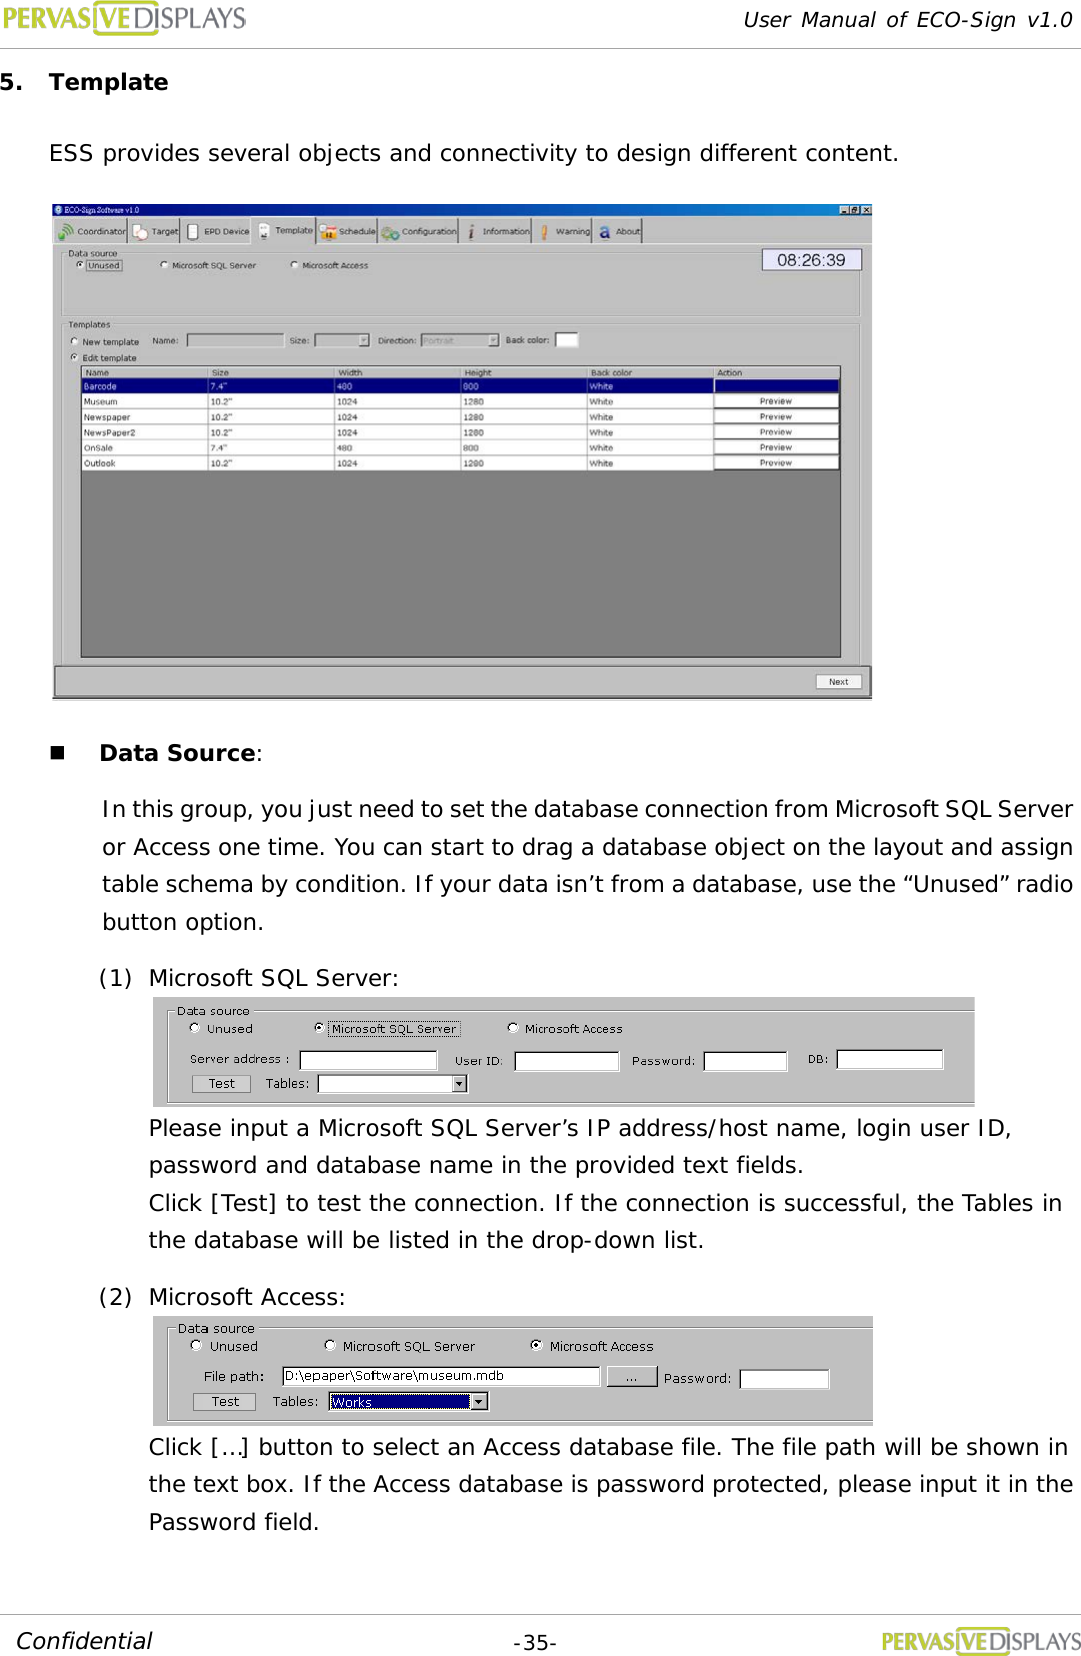 User Manual of ECO-Sign v1.0  -35- Confidential 5. Template  ESS provides several objects and connectivity to design different content.   Data Source: In this group, you just need to set the database connection from Microsoft SQL Server or Access one time. You can start to drag a database object on the layout and assign table schema by condition. If your data isn’t from a database, use the “Unused” radio button option. (1) Microsoft SQL Server:   Please input a Microsoft SQL Server’s IP address/host name, login user ID, password and database name in the provided text fields. Click [Test] to test the connection. If the connection is successful, the Tables in the database will be listed in the drop-down list. (2) Microsoft Access:   Click […] button to select an Access database file. The file path will be shown in the text box. If the Access database is password protected, please input it in the Password field. 